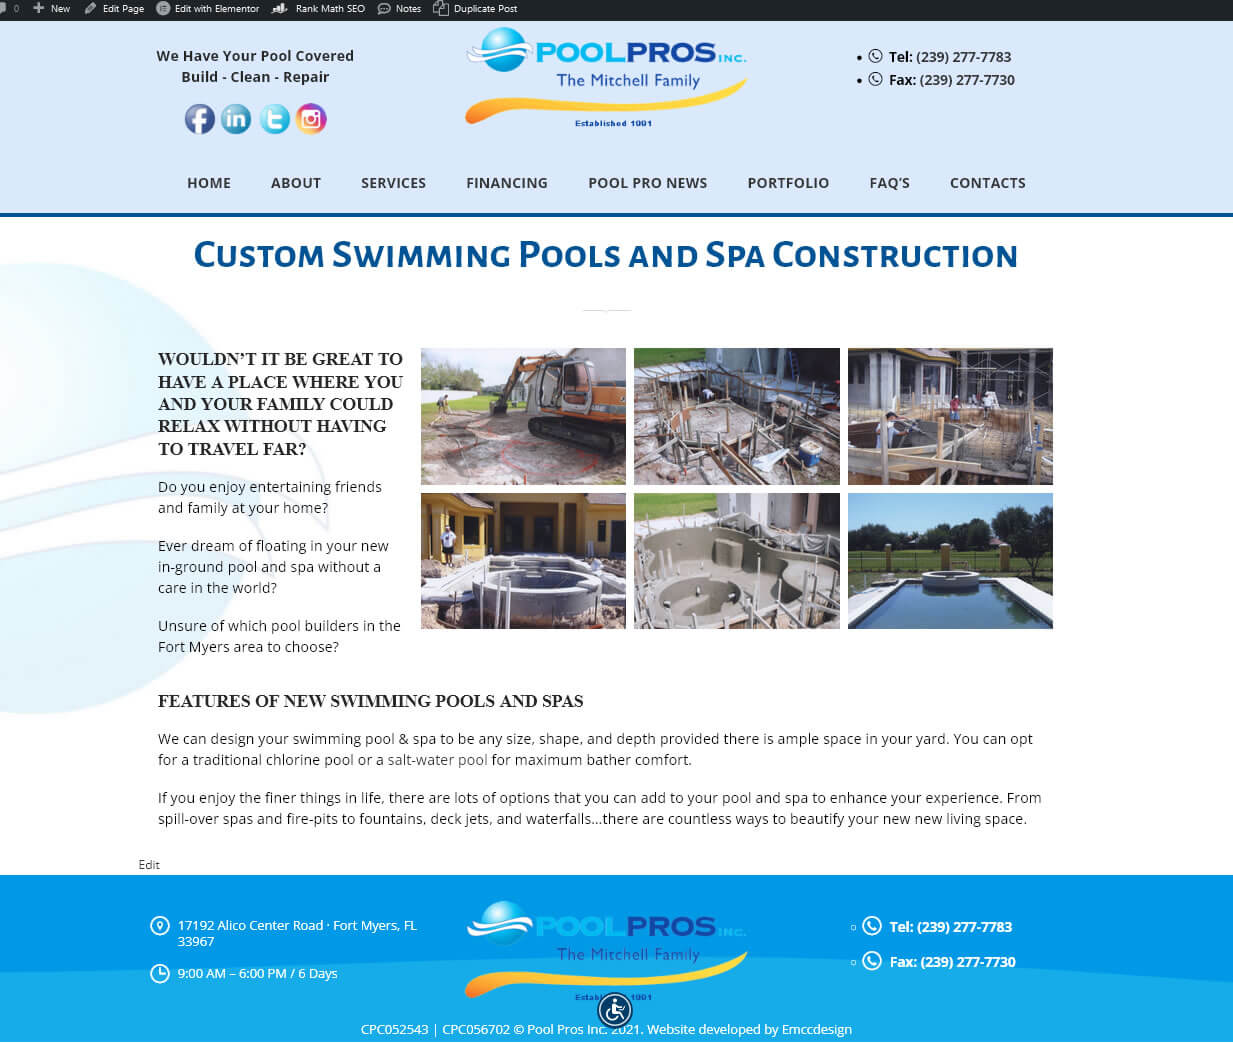 Poolpros - The Mitchell Family